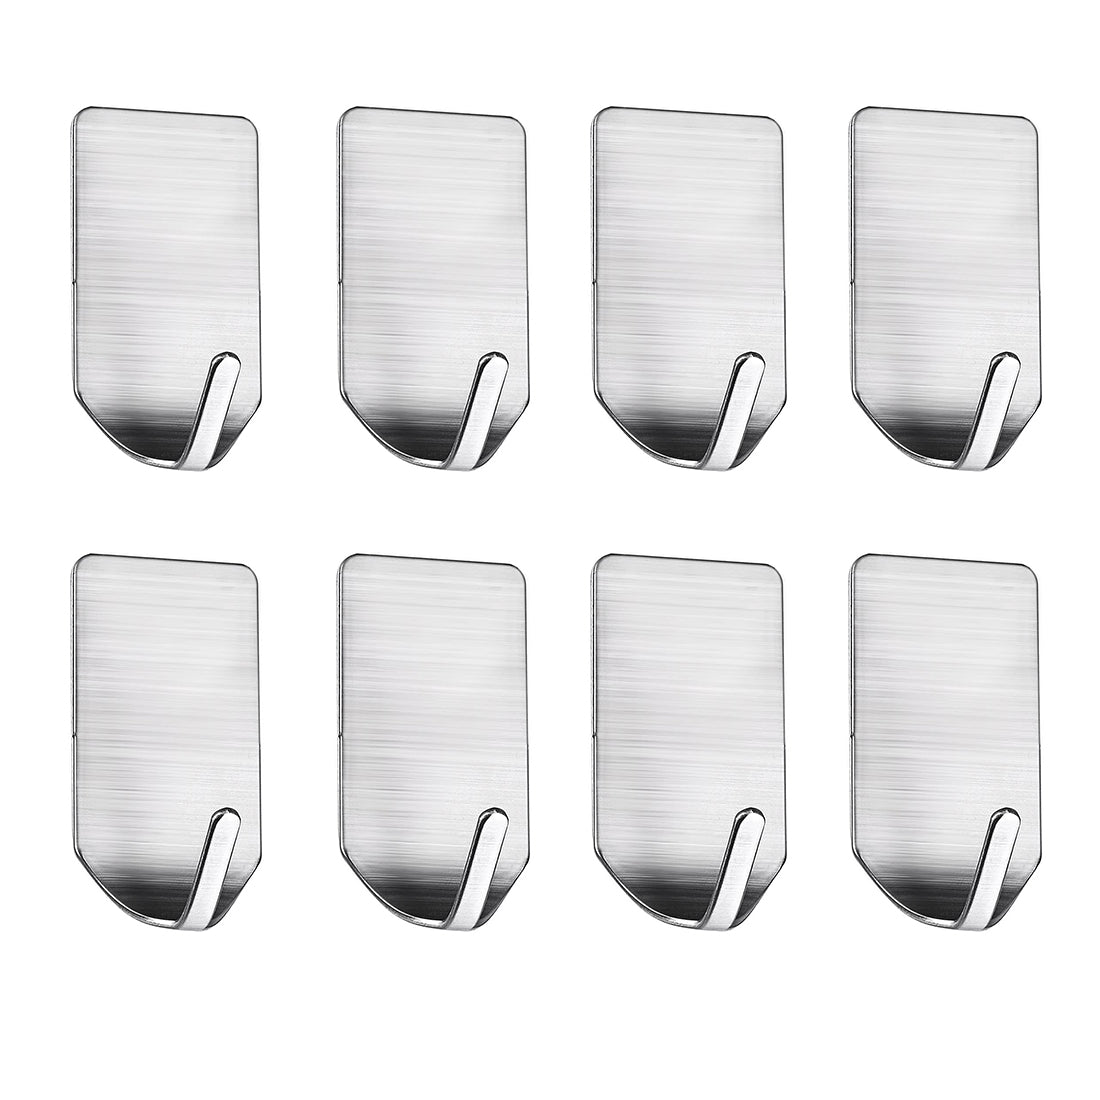 HASTHIP® Hooks for Wall Without Drilling, Stainless Steel Adhesive Wall Hanger Self Adhesive Waterproof Heavy Duty Sticky Narrow Wall Hooks (Pack 8).